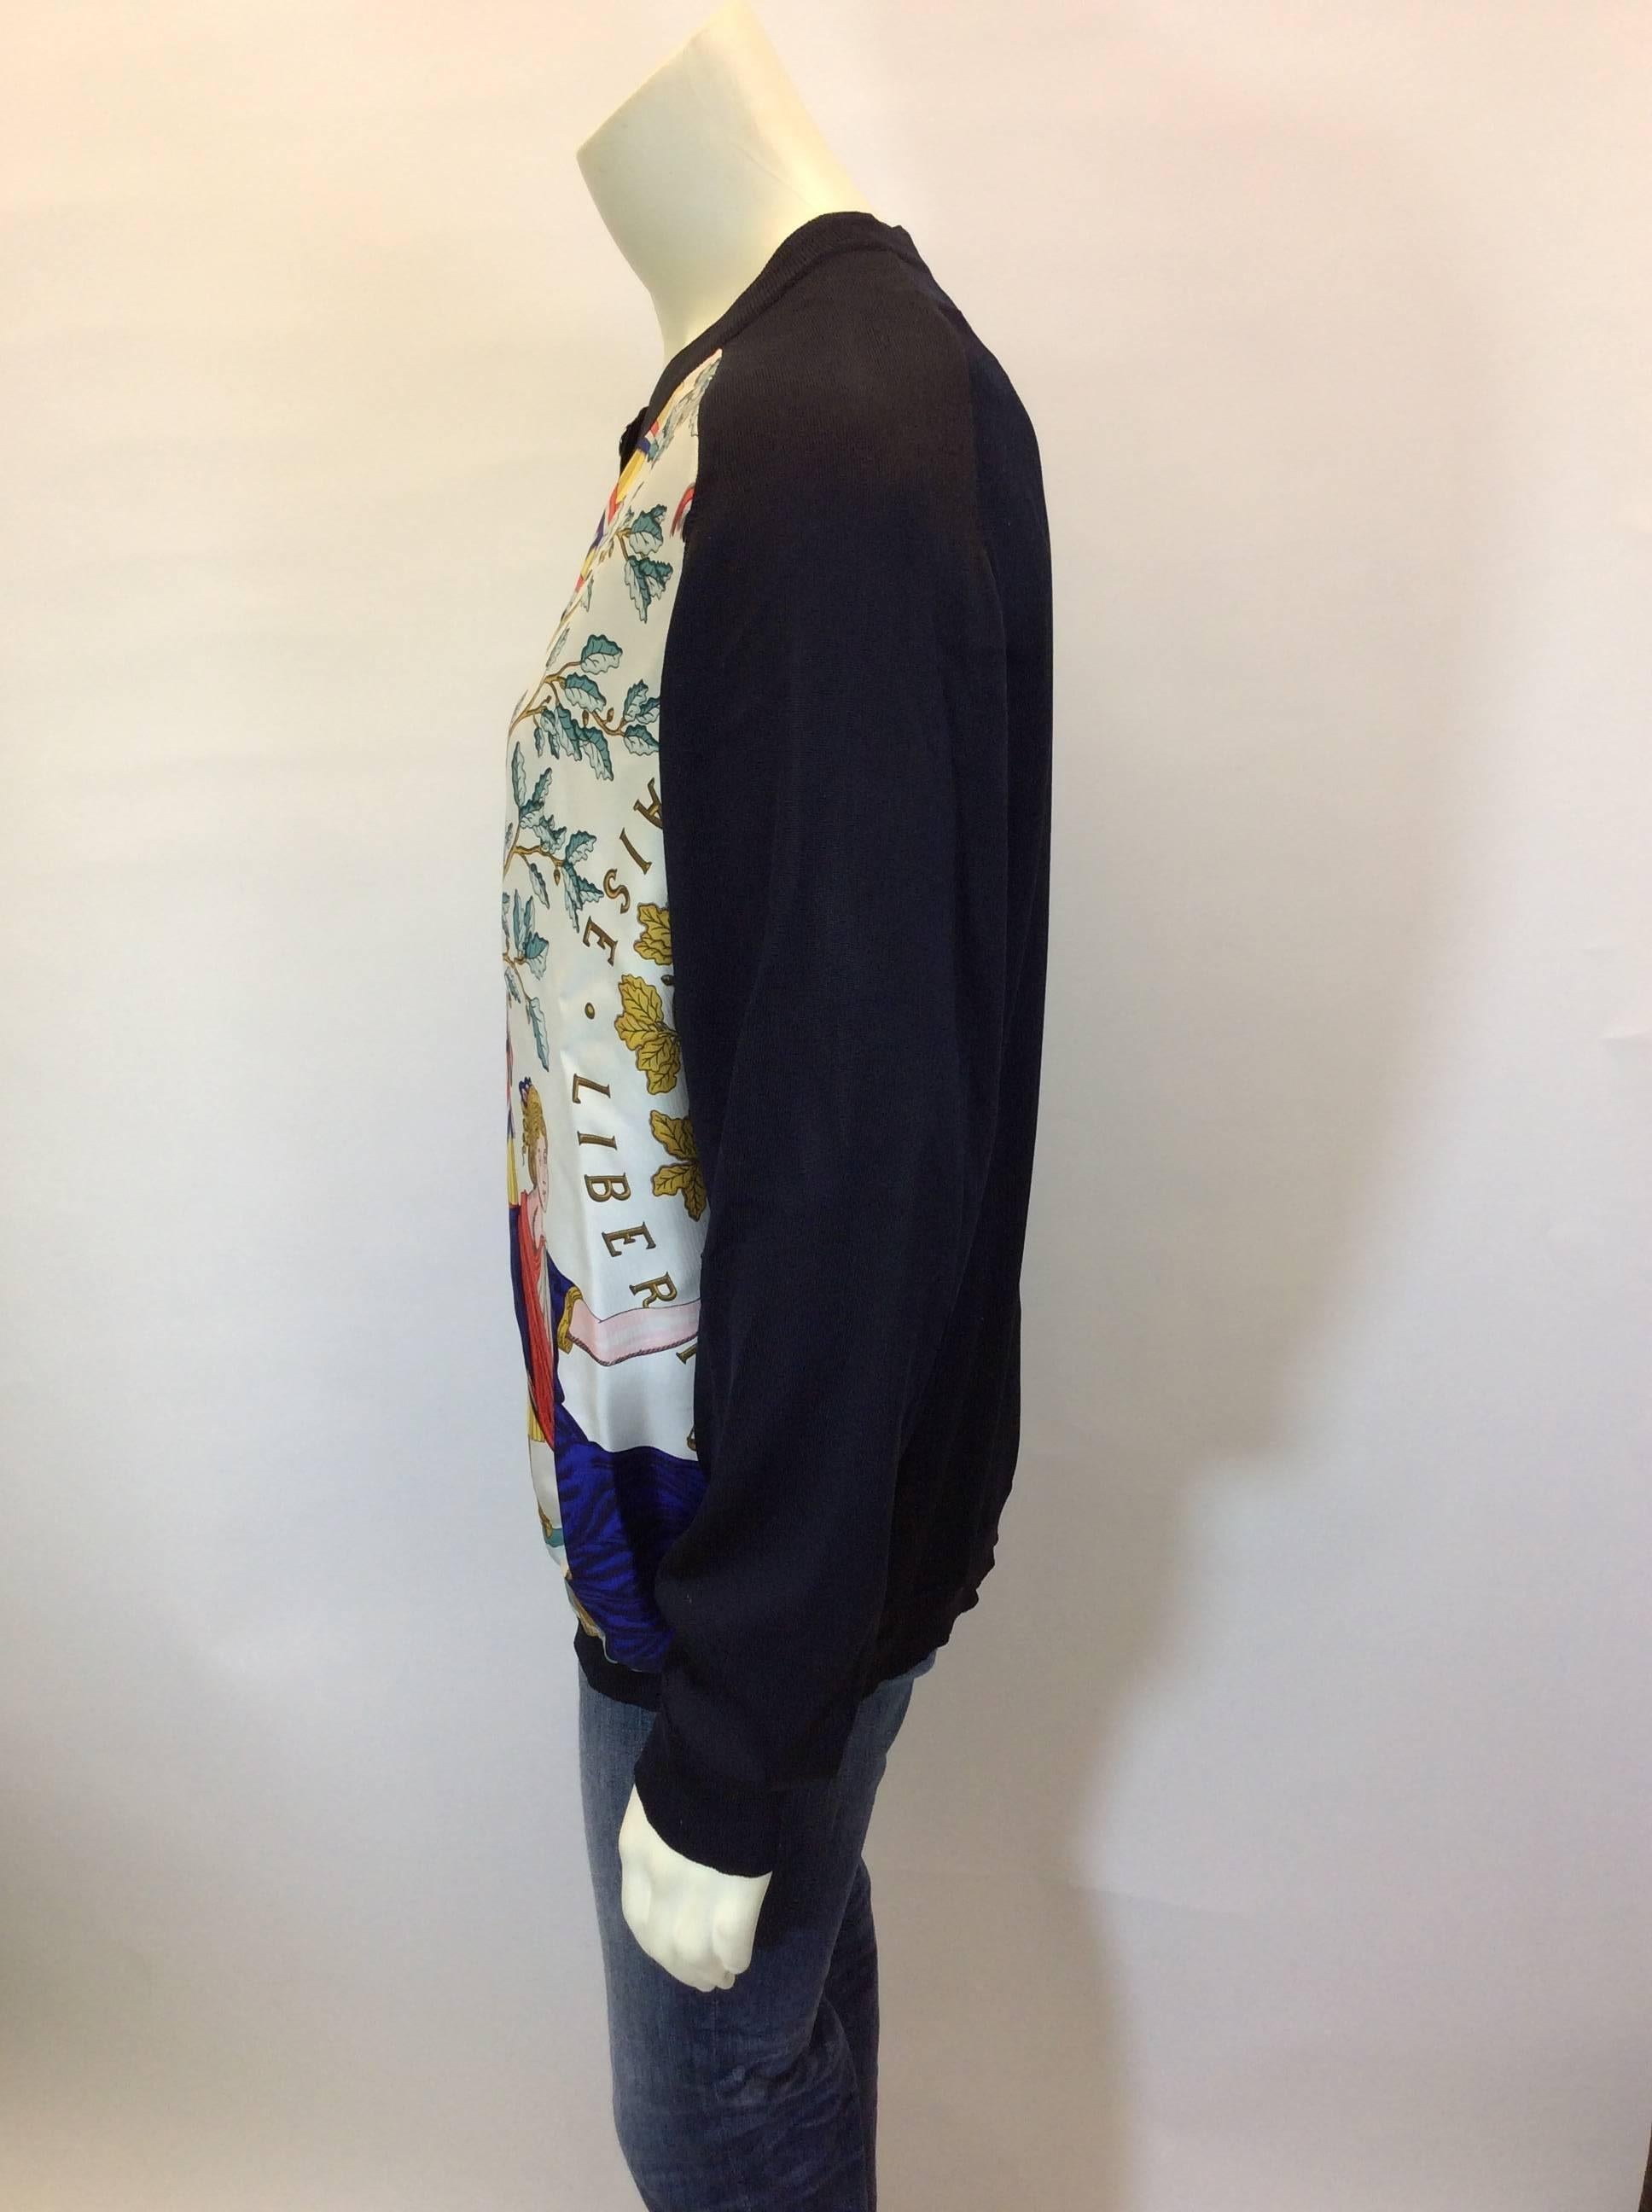 Printed Silk Cardigan
7 button front closure
Features silk Hermes printed panels on front
Ribbed cuff and waistband
Size 44 (equates to US 12)
100% Silk